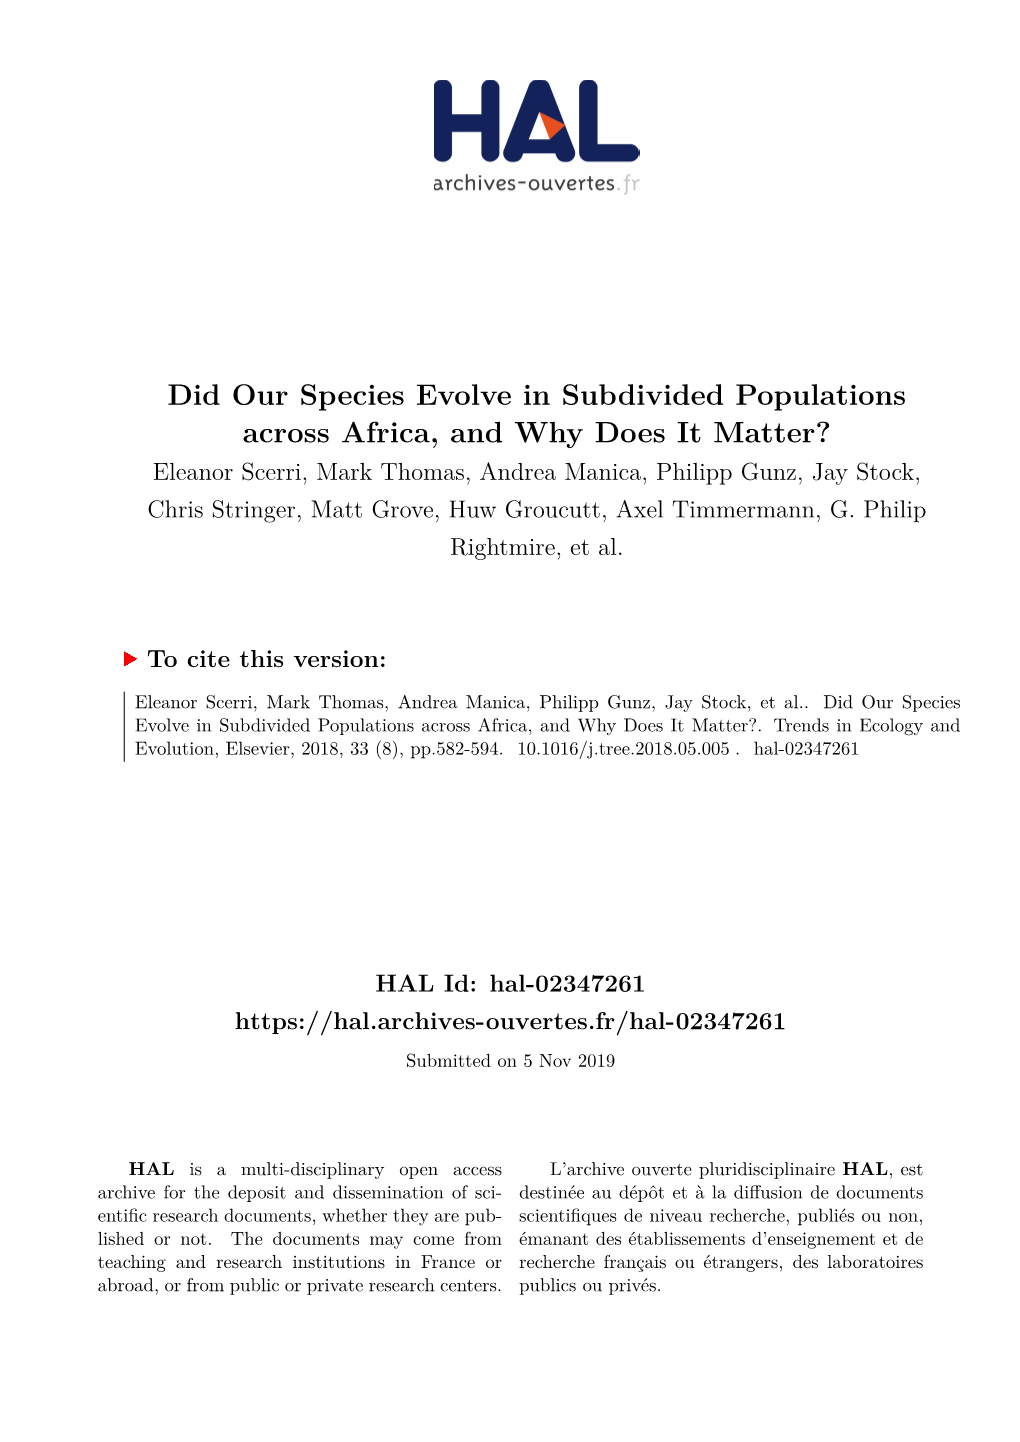 Did Our Species Evolve in Subdivided Populations